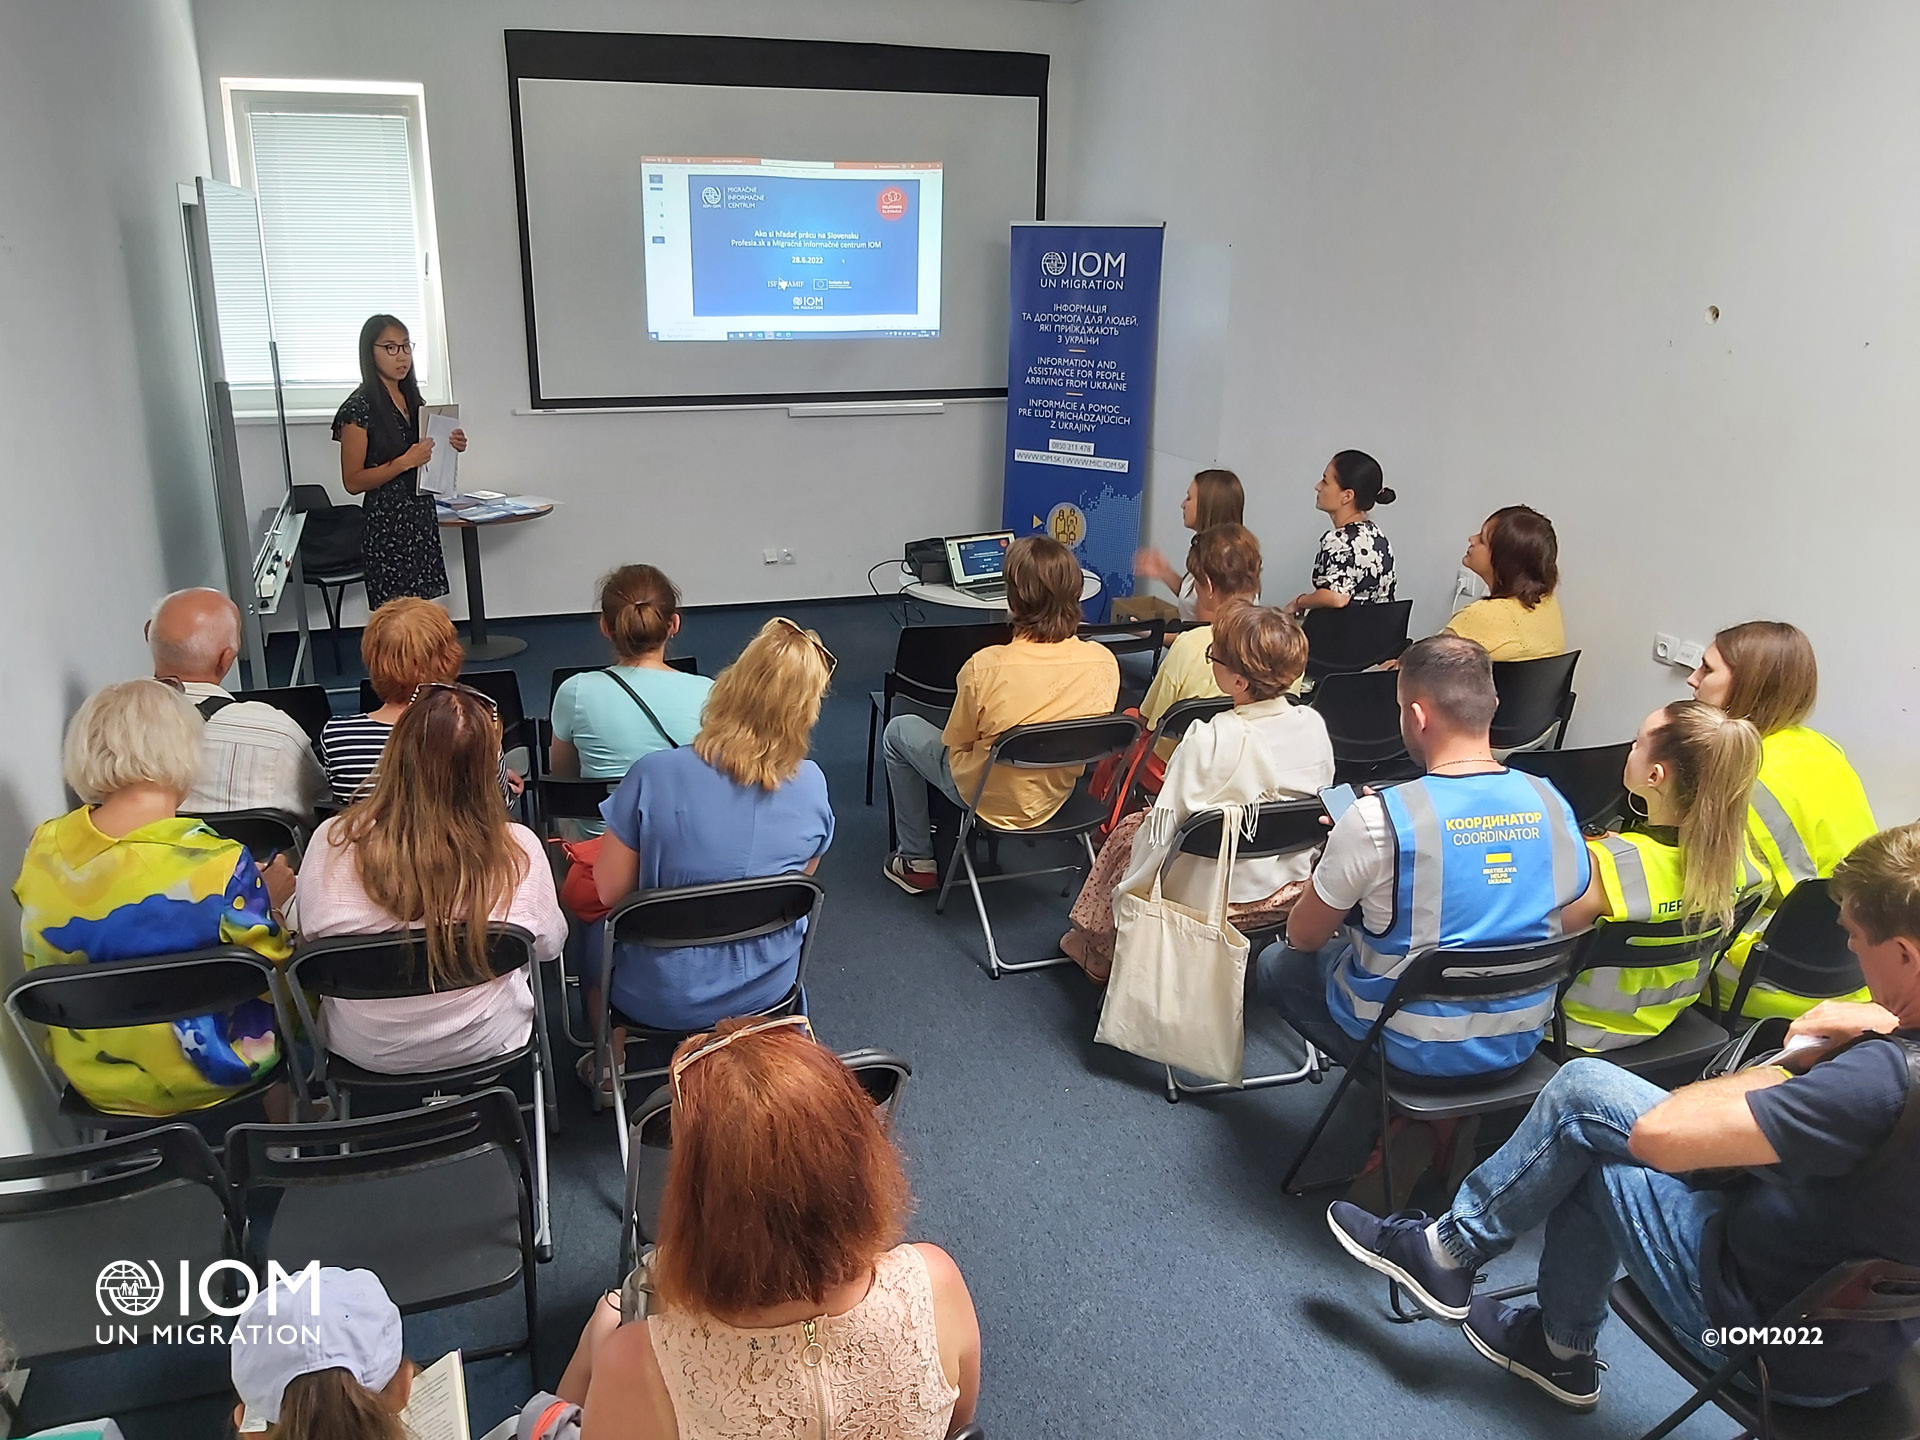 Workshop with presentation of IOM MIC free advice and services for non-EU nationals in Slovakia. Photo © International Organization for Migration (IOM) 2022.